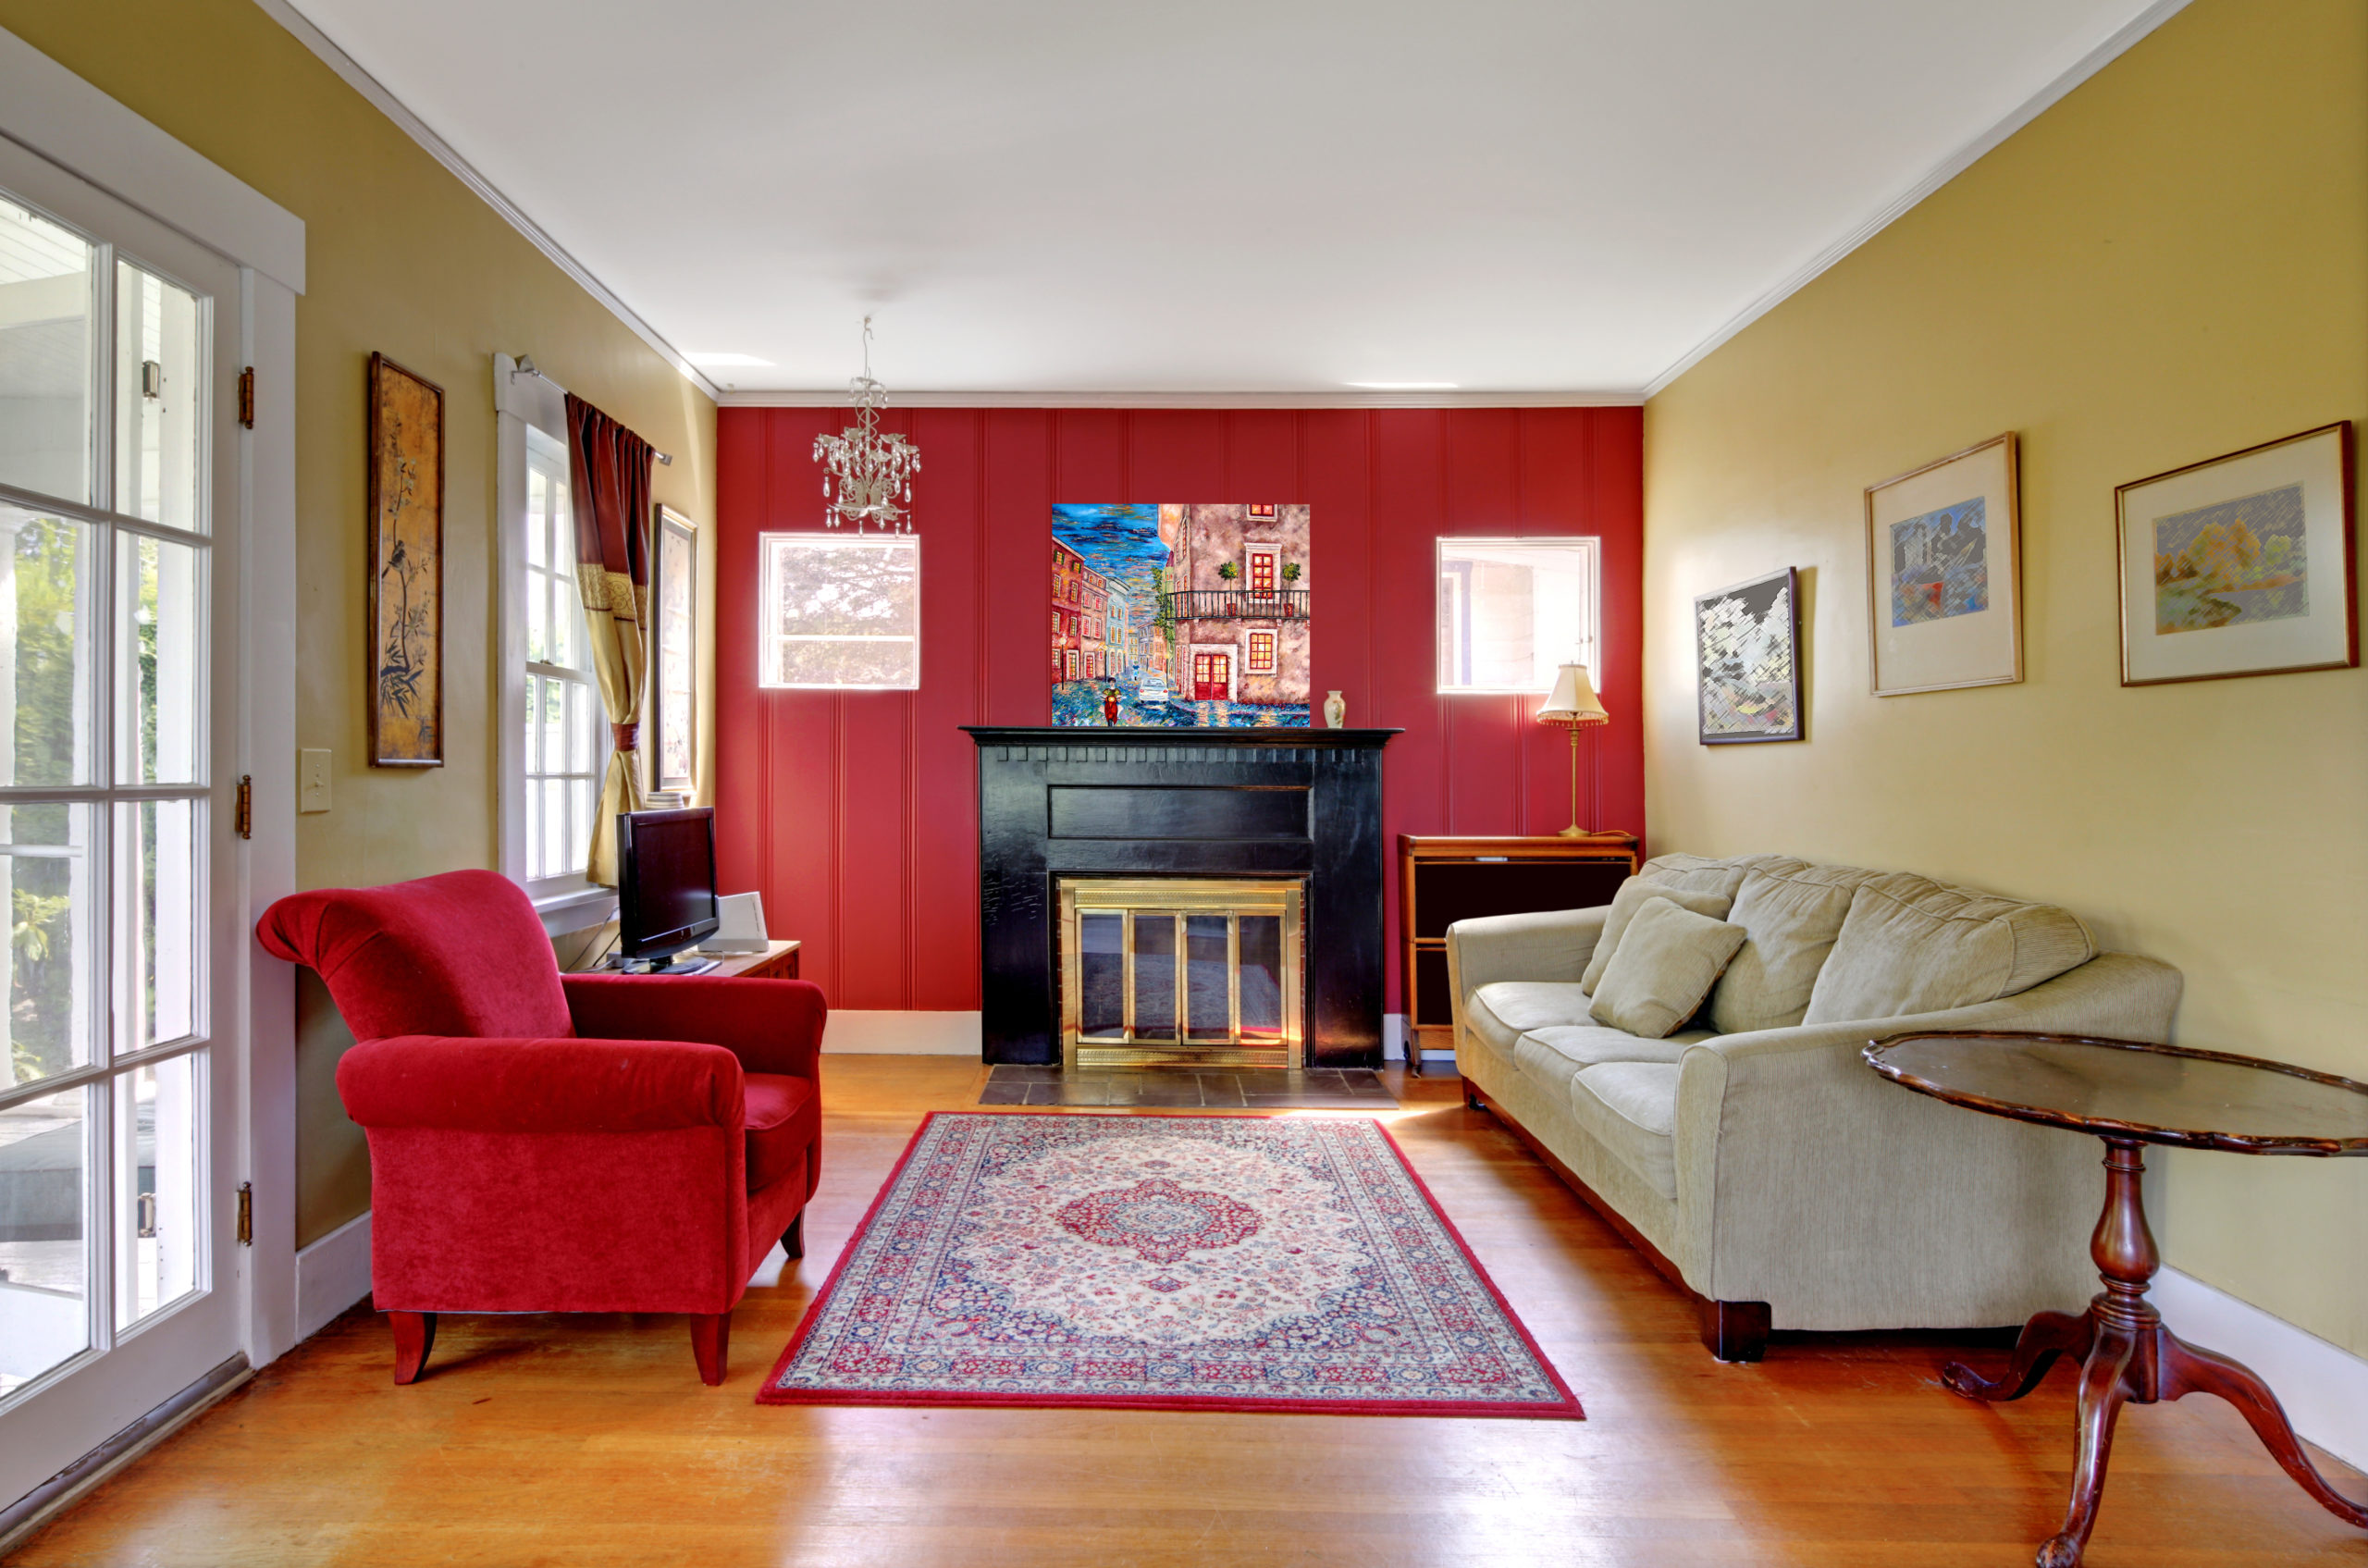 Living,Room,With,Red,And,Yellow,Walls,And,Fireplace,In